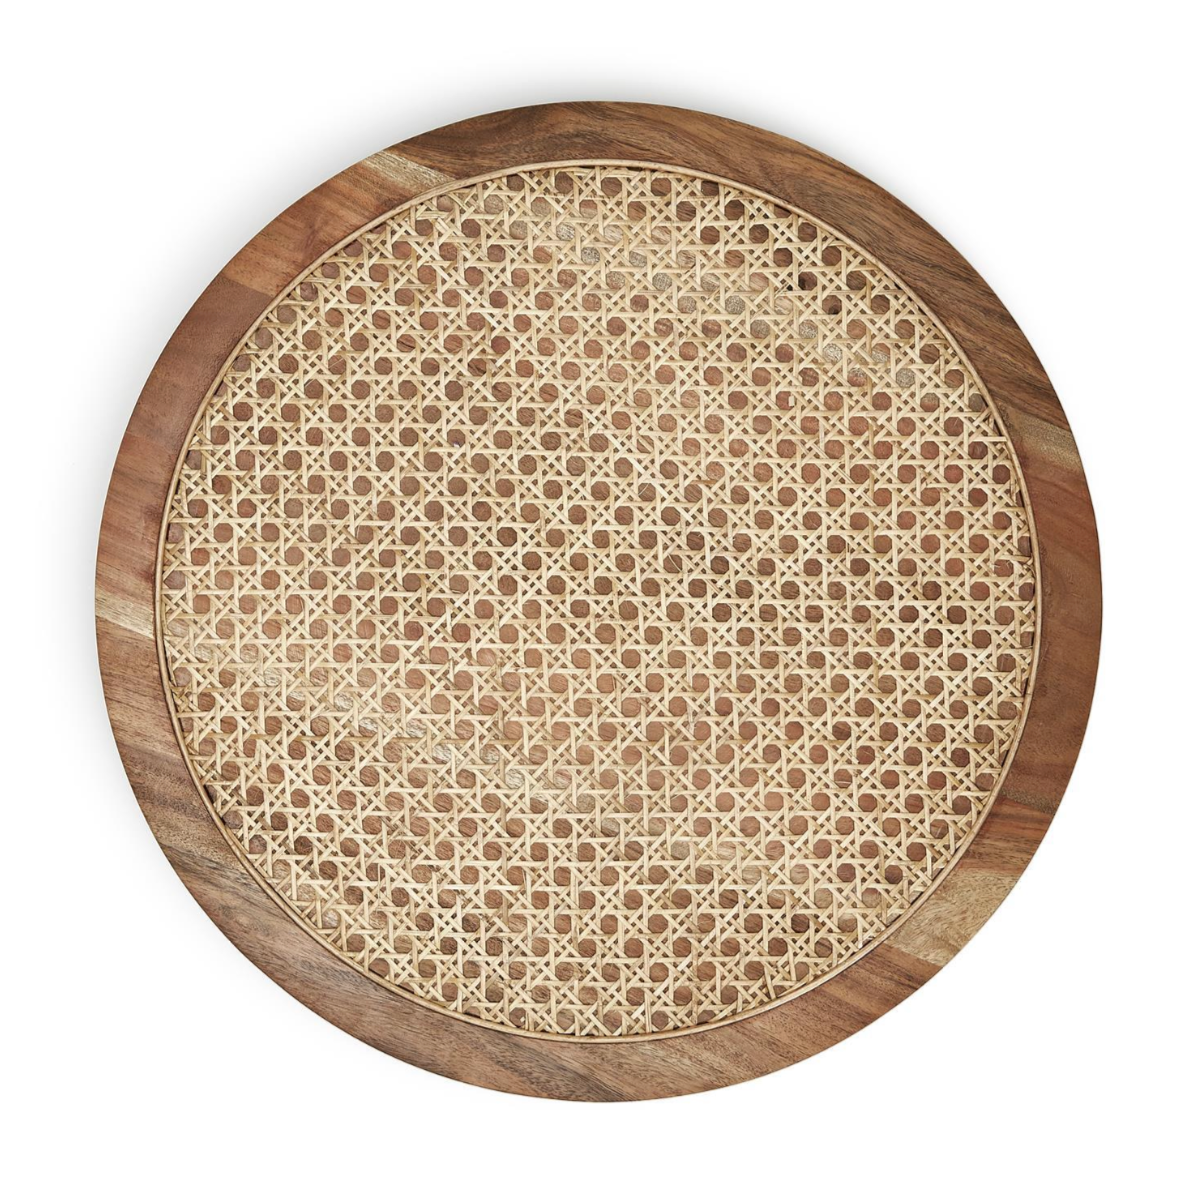 Cane Inlay Hand-Crafted Rotating Lazy Susan Centerpie